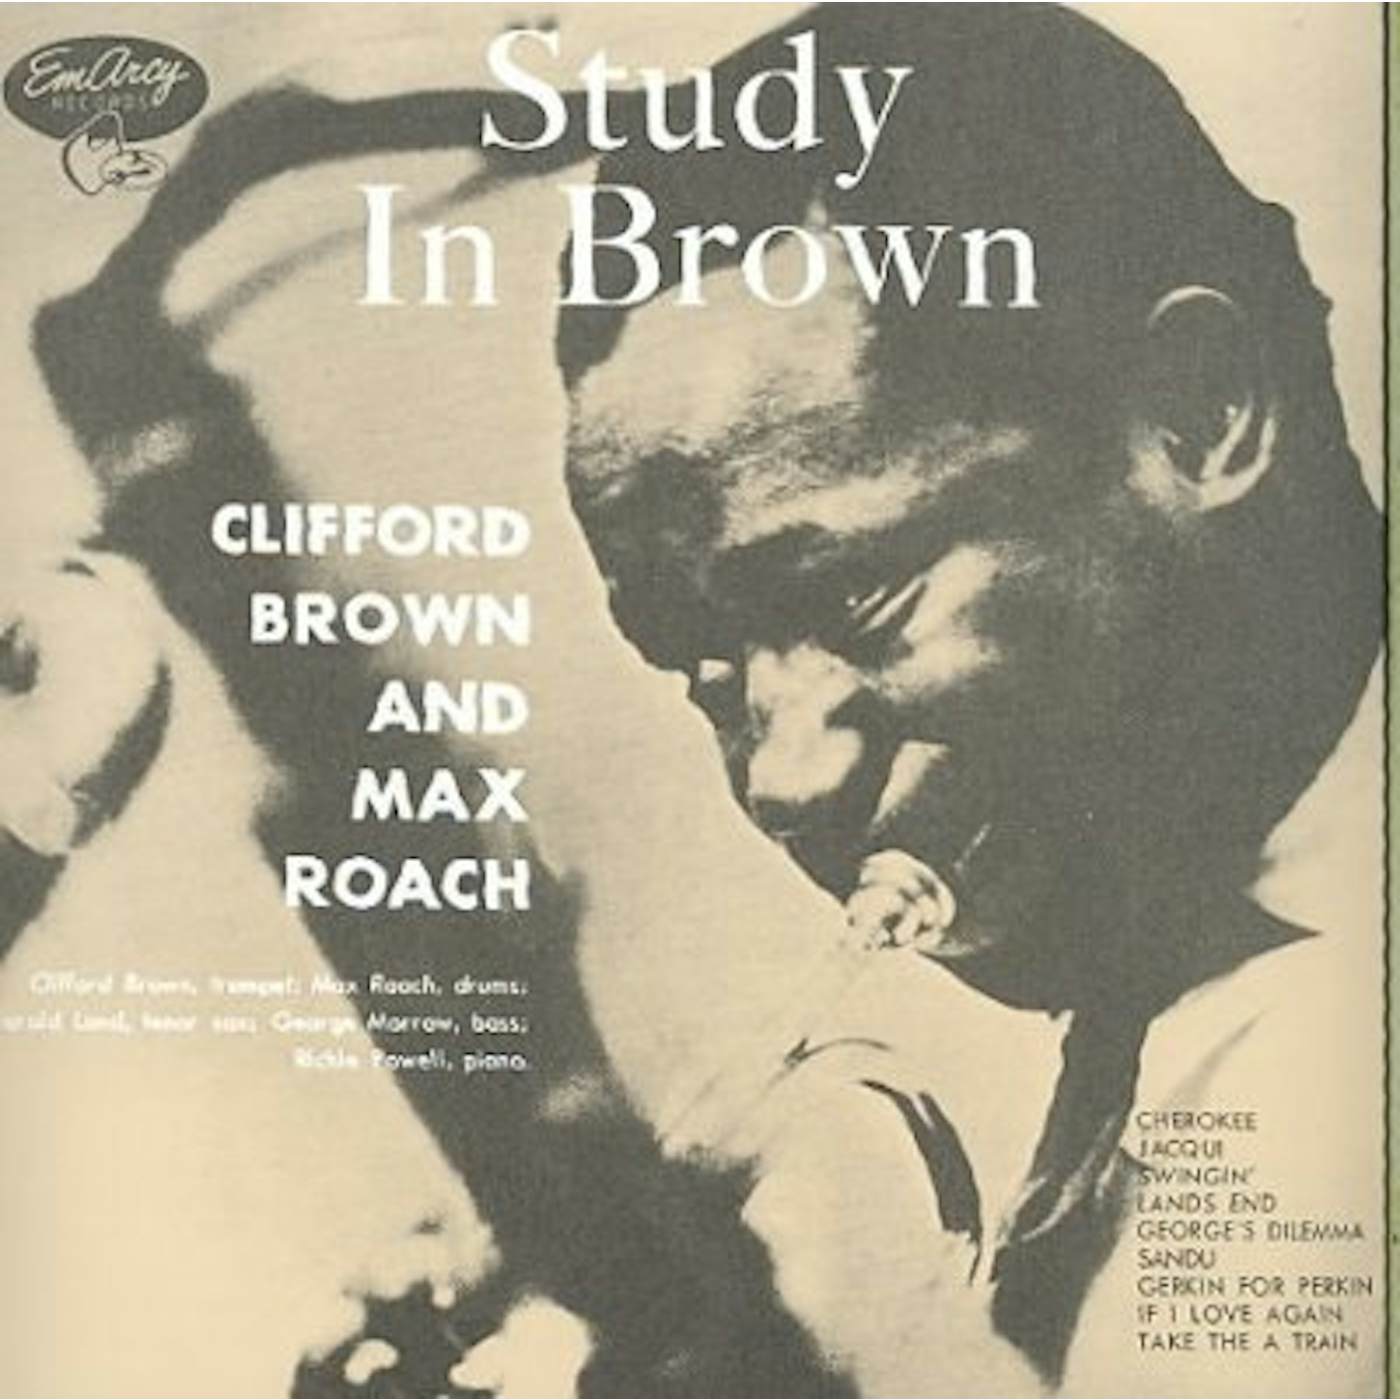 Clifford Brown & Max Roach Study In Brown CD